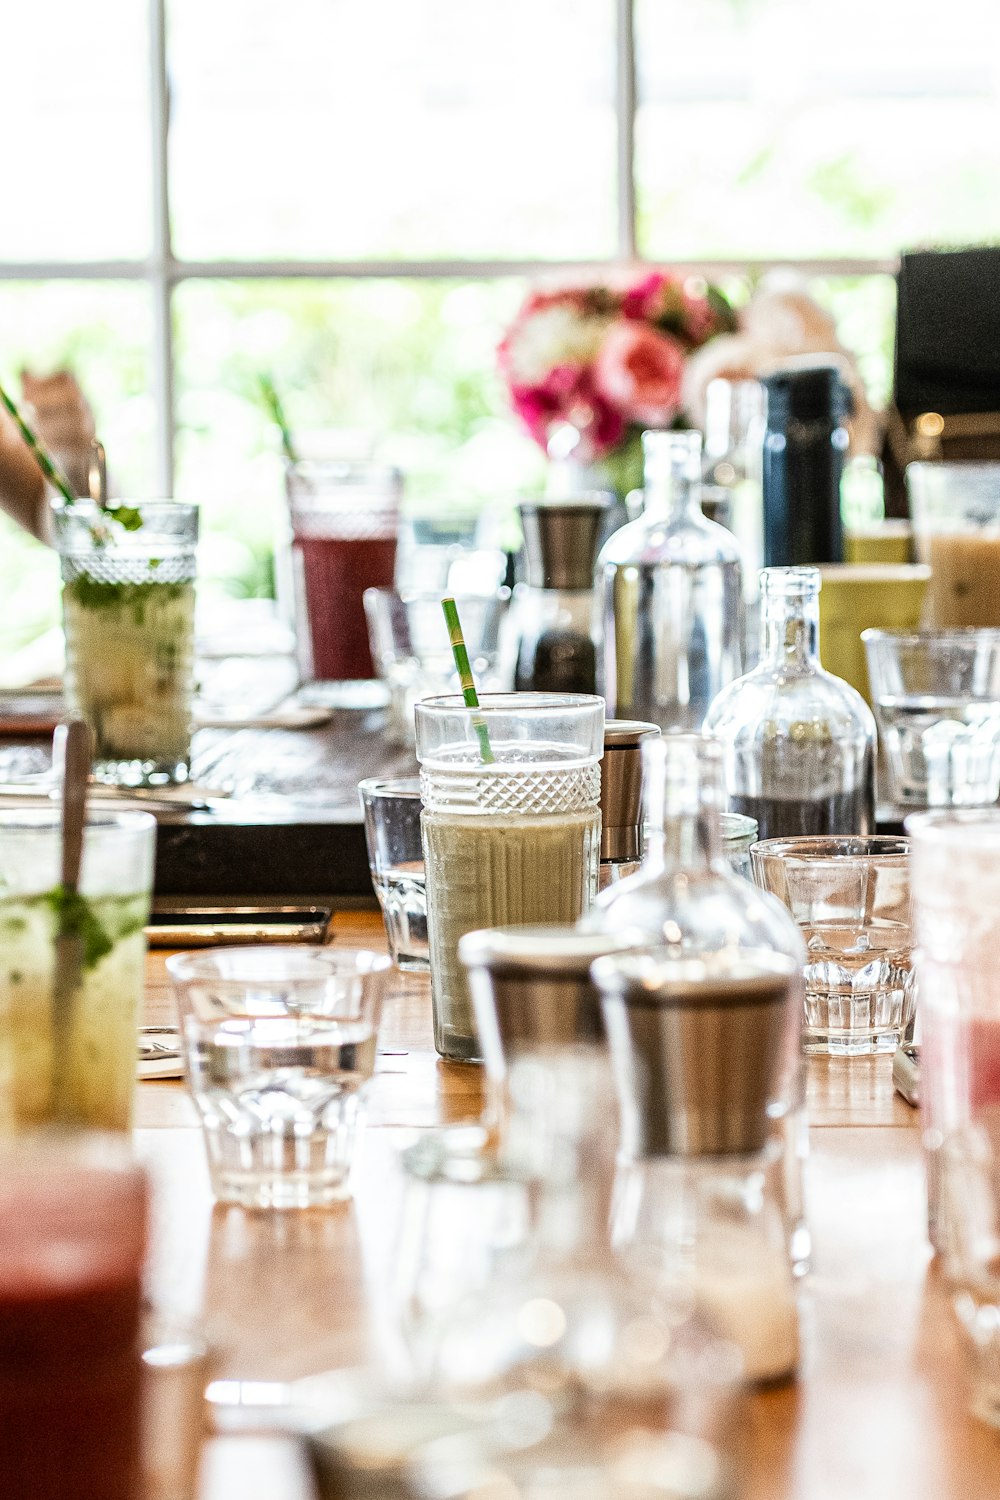 a table with glasses and bottles of liquid on it